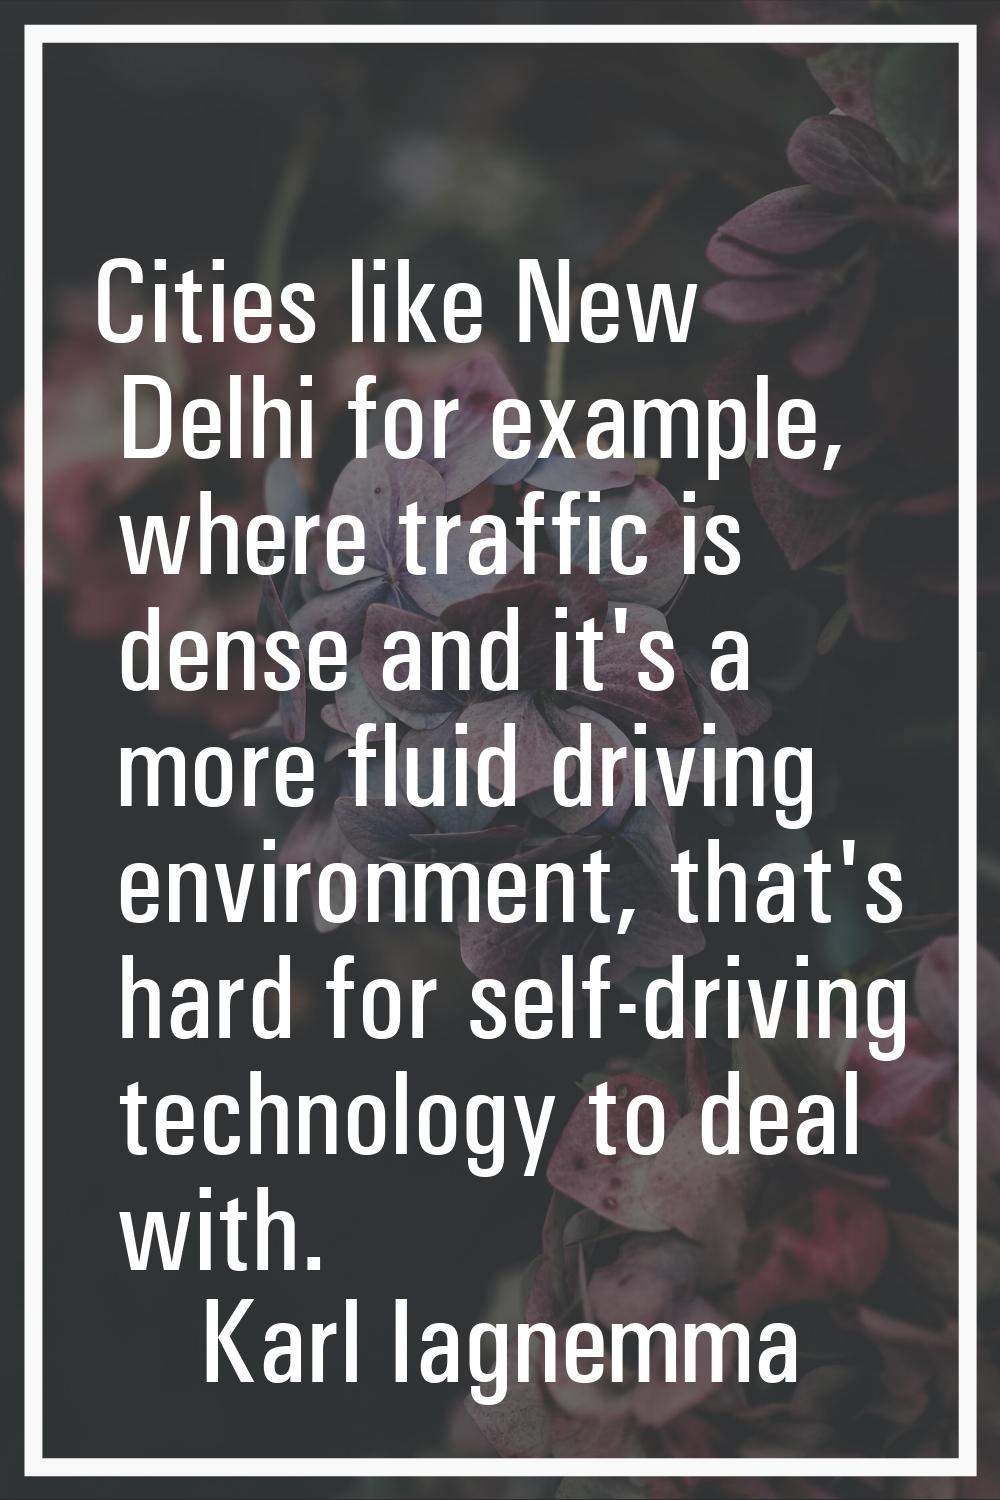 Cities like New Delhi for example, where traffic is dense and it's a more fluid driving environment